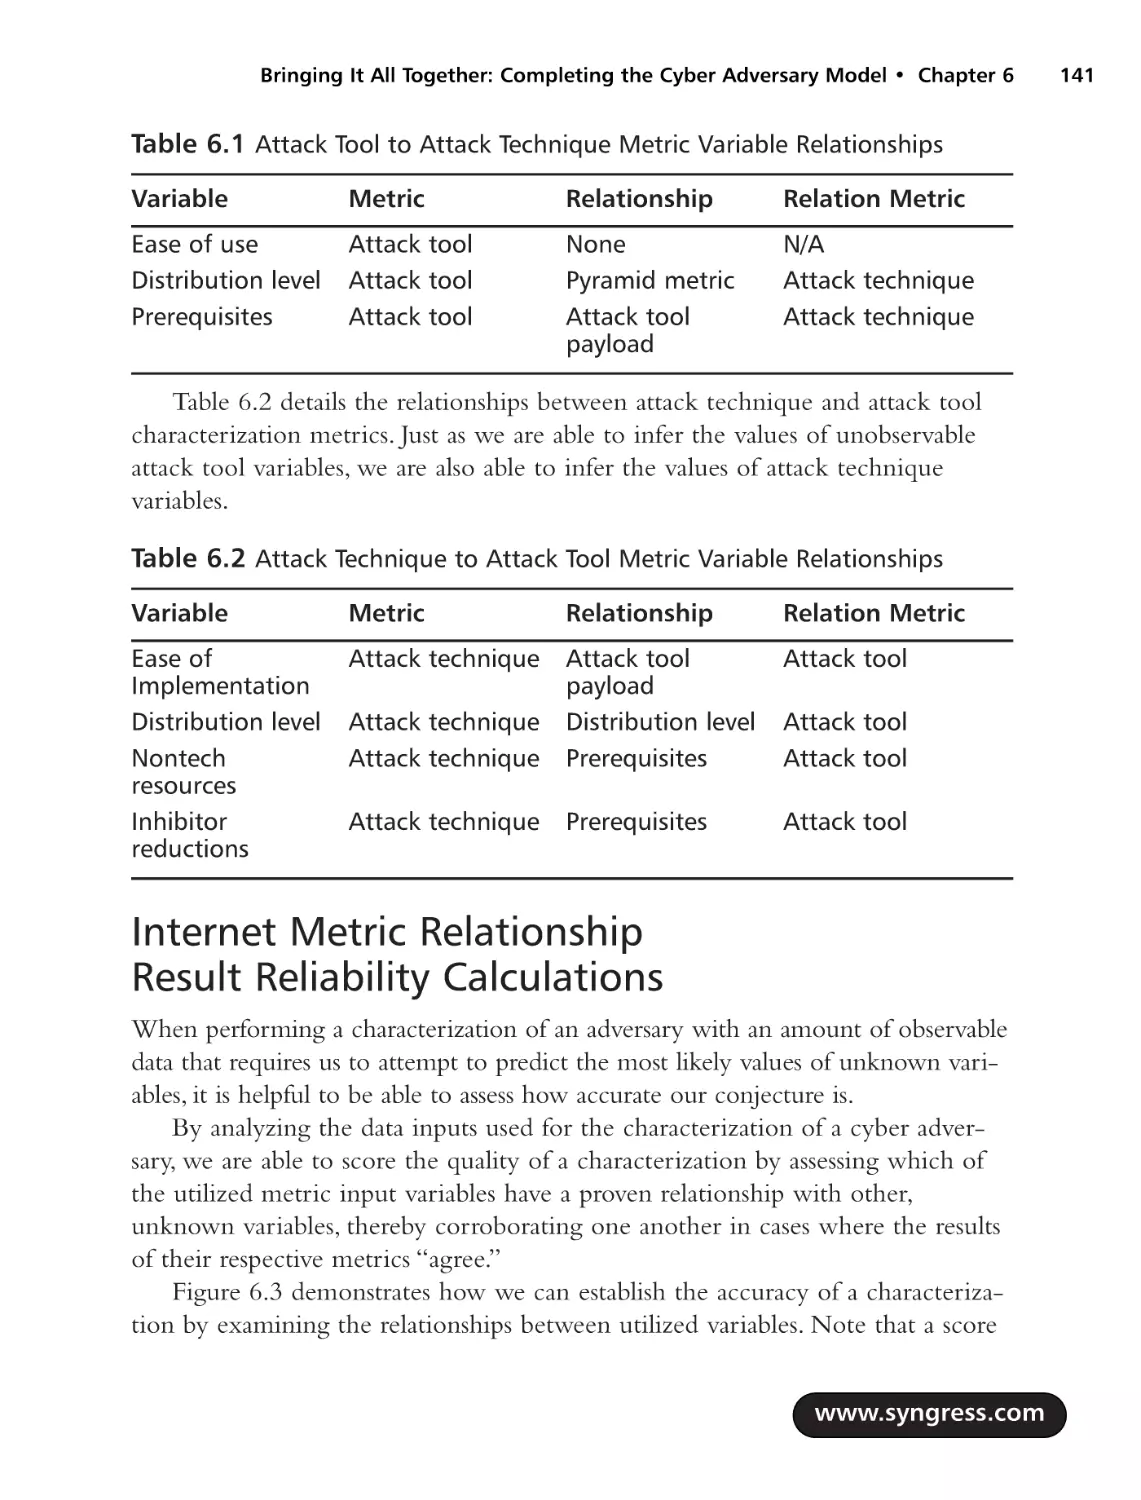 Internet Metric Relationship Result Reliability Calculations